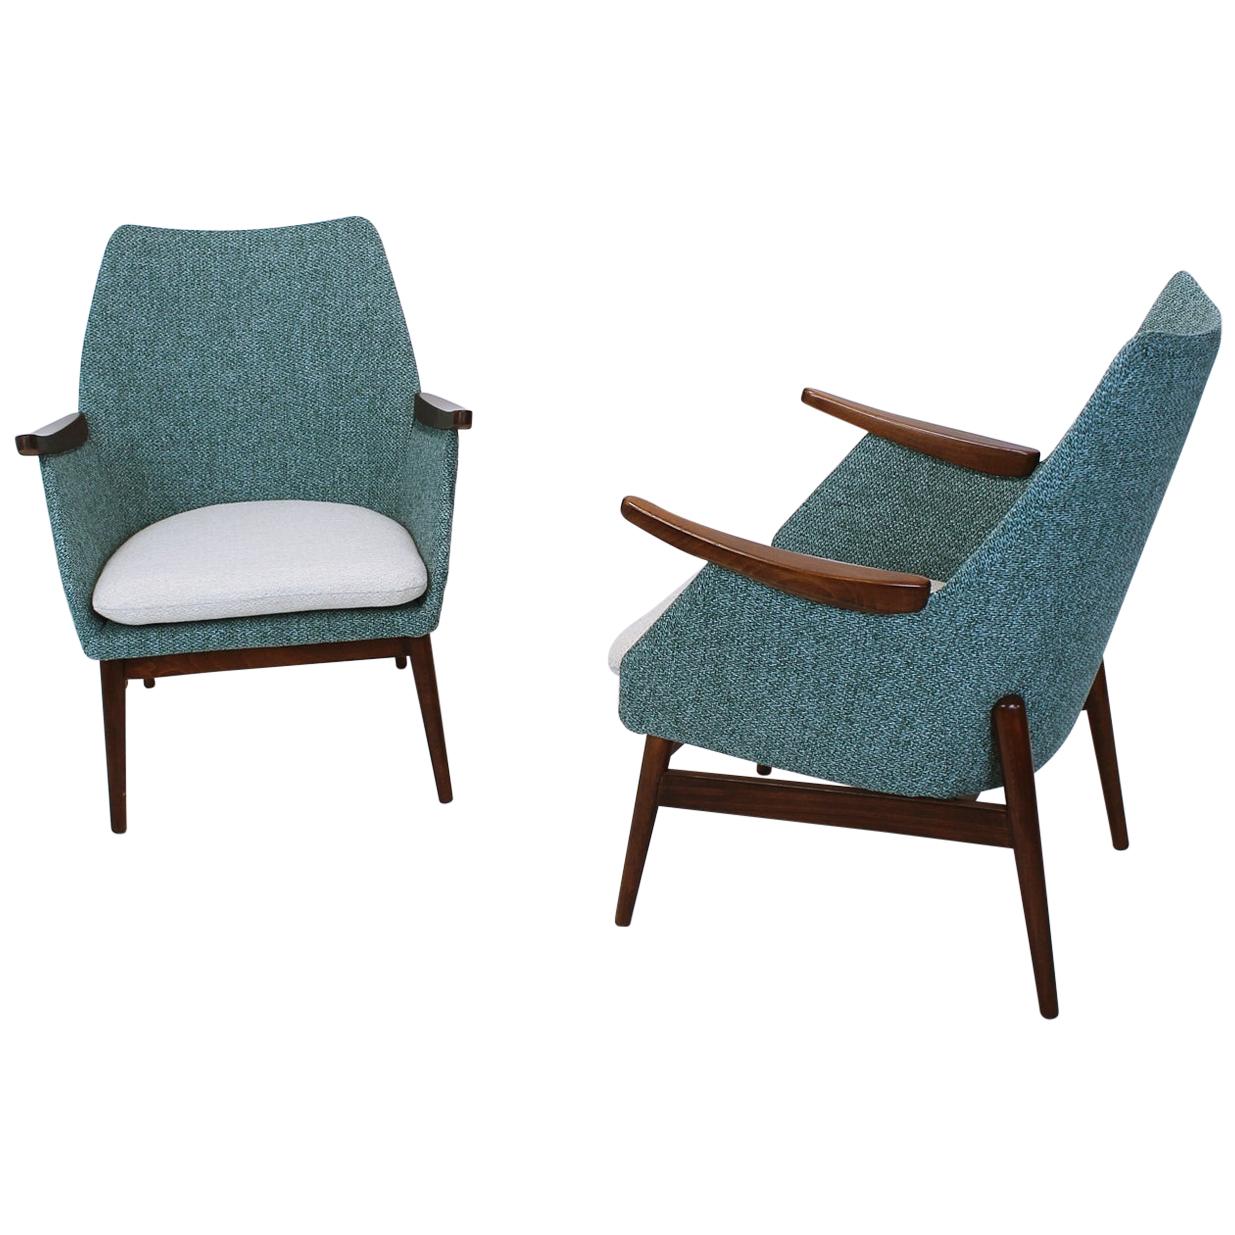 Vintage Hungarian Midcentury Cocktail Chairs, 1960s